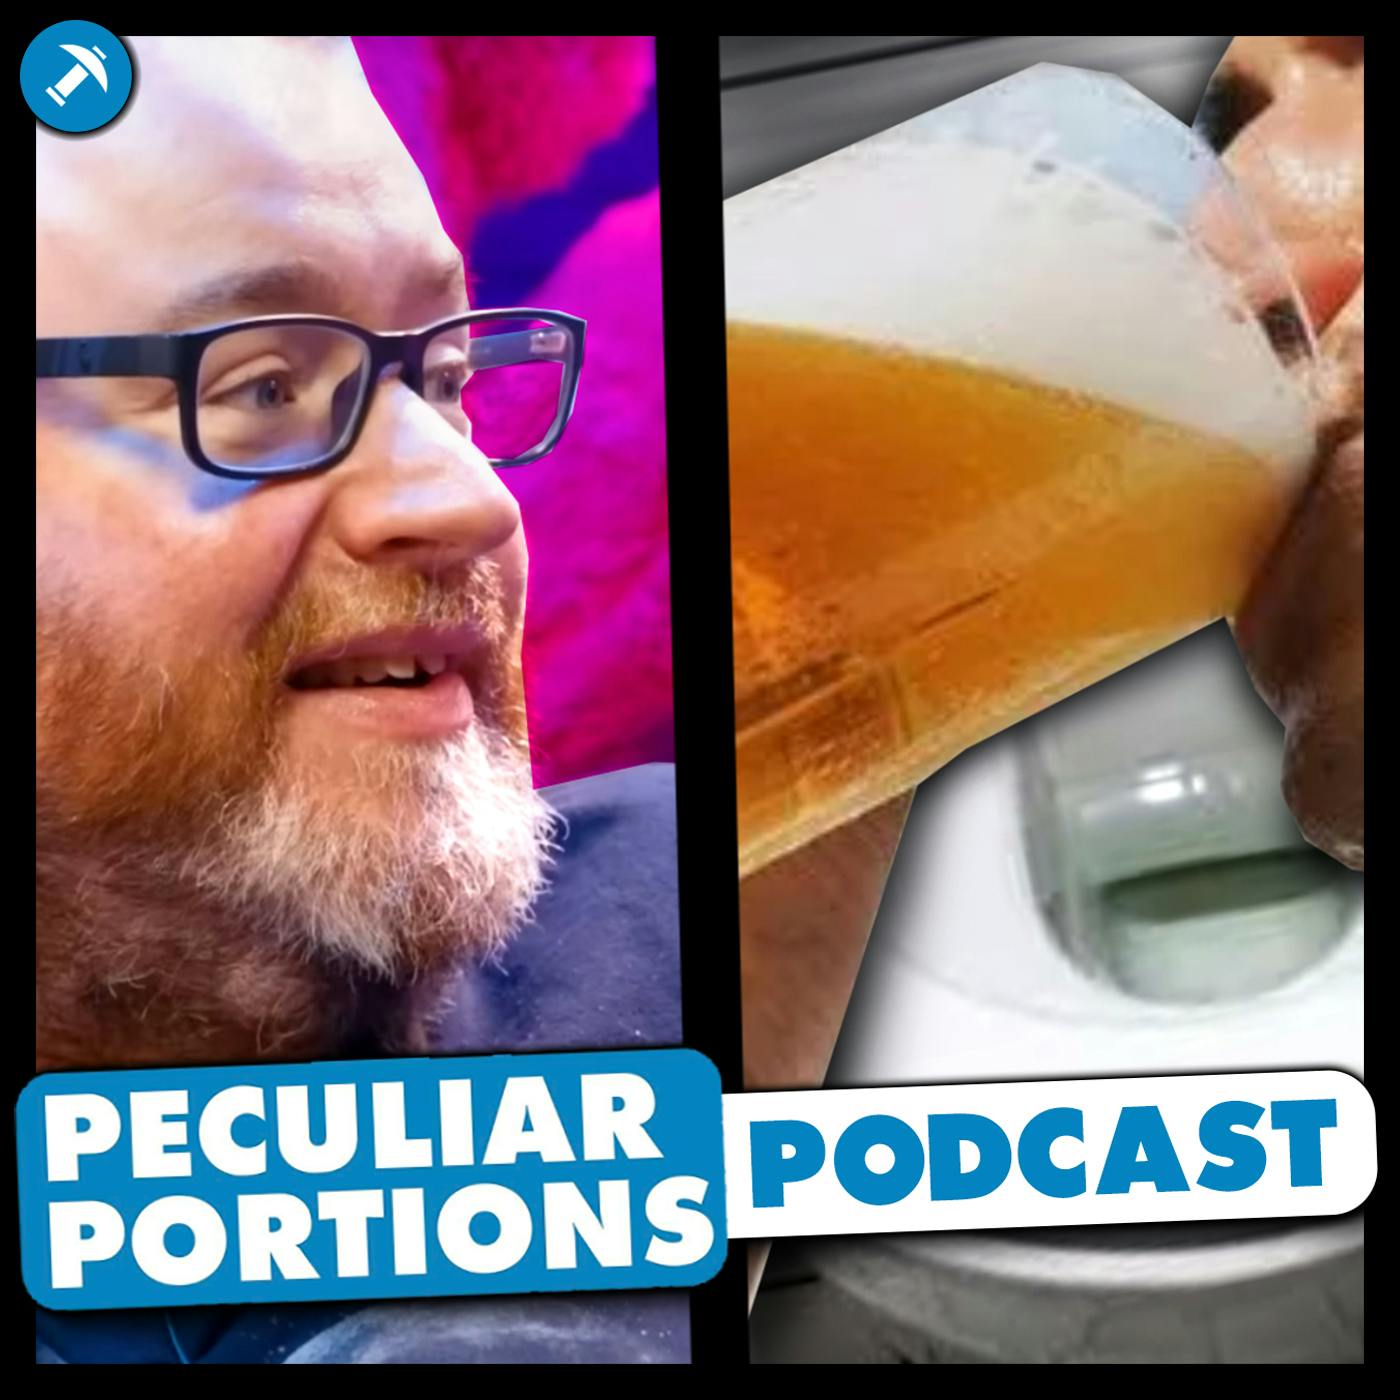 Beer made from recycled toilet water - Peculiar Portions Podcast #63